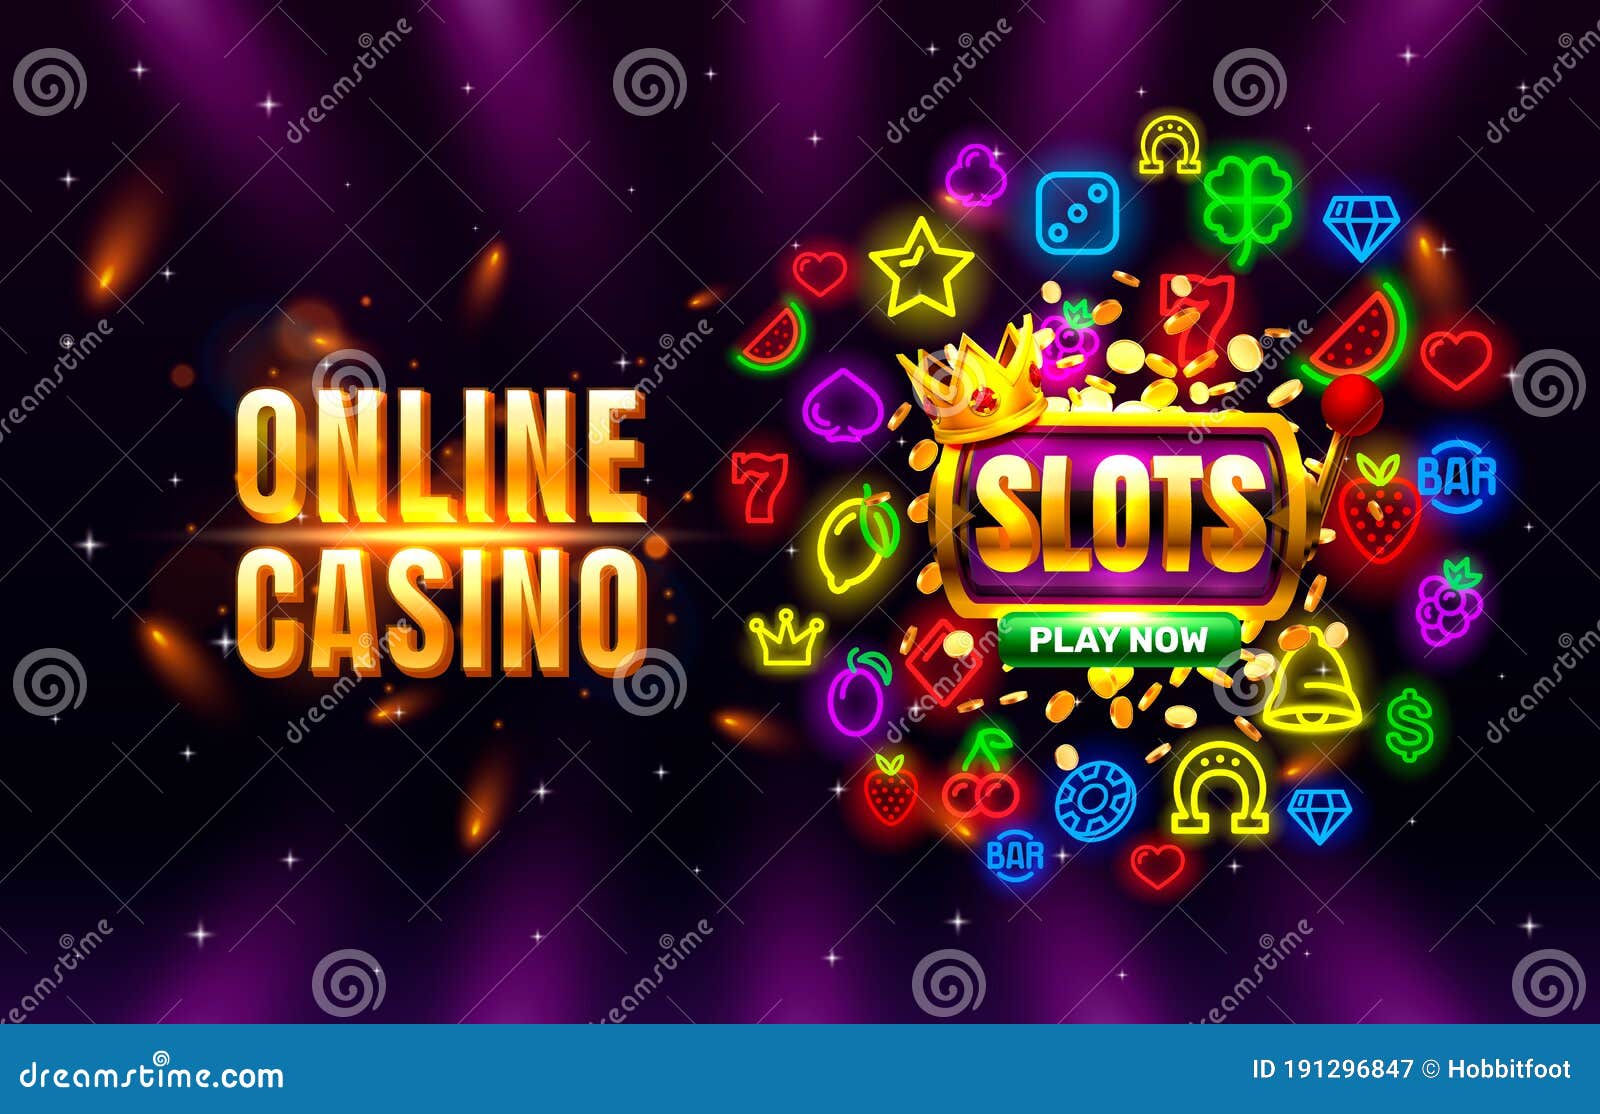 Super Easy Simple Ways The Pros Use To Promote top online slots